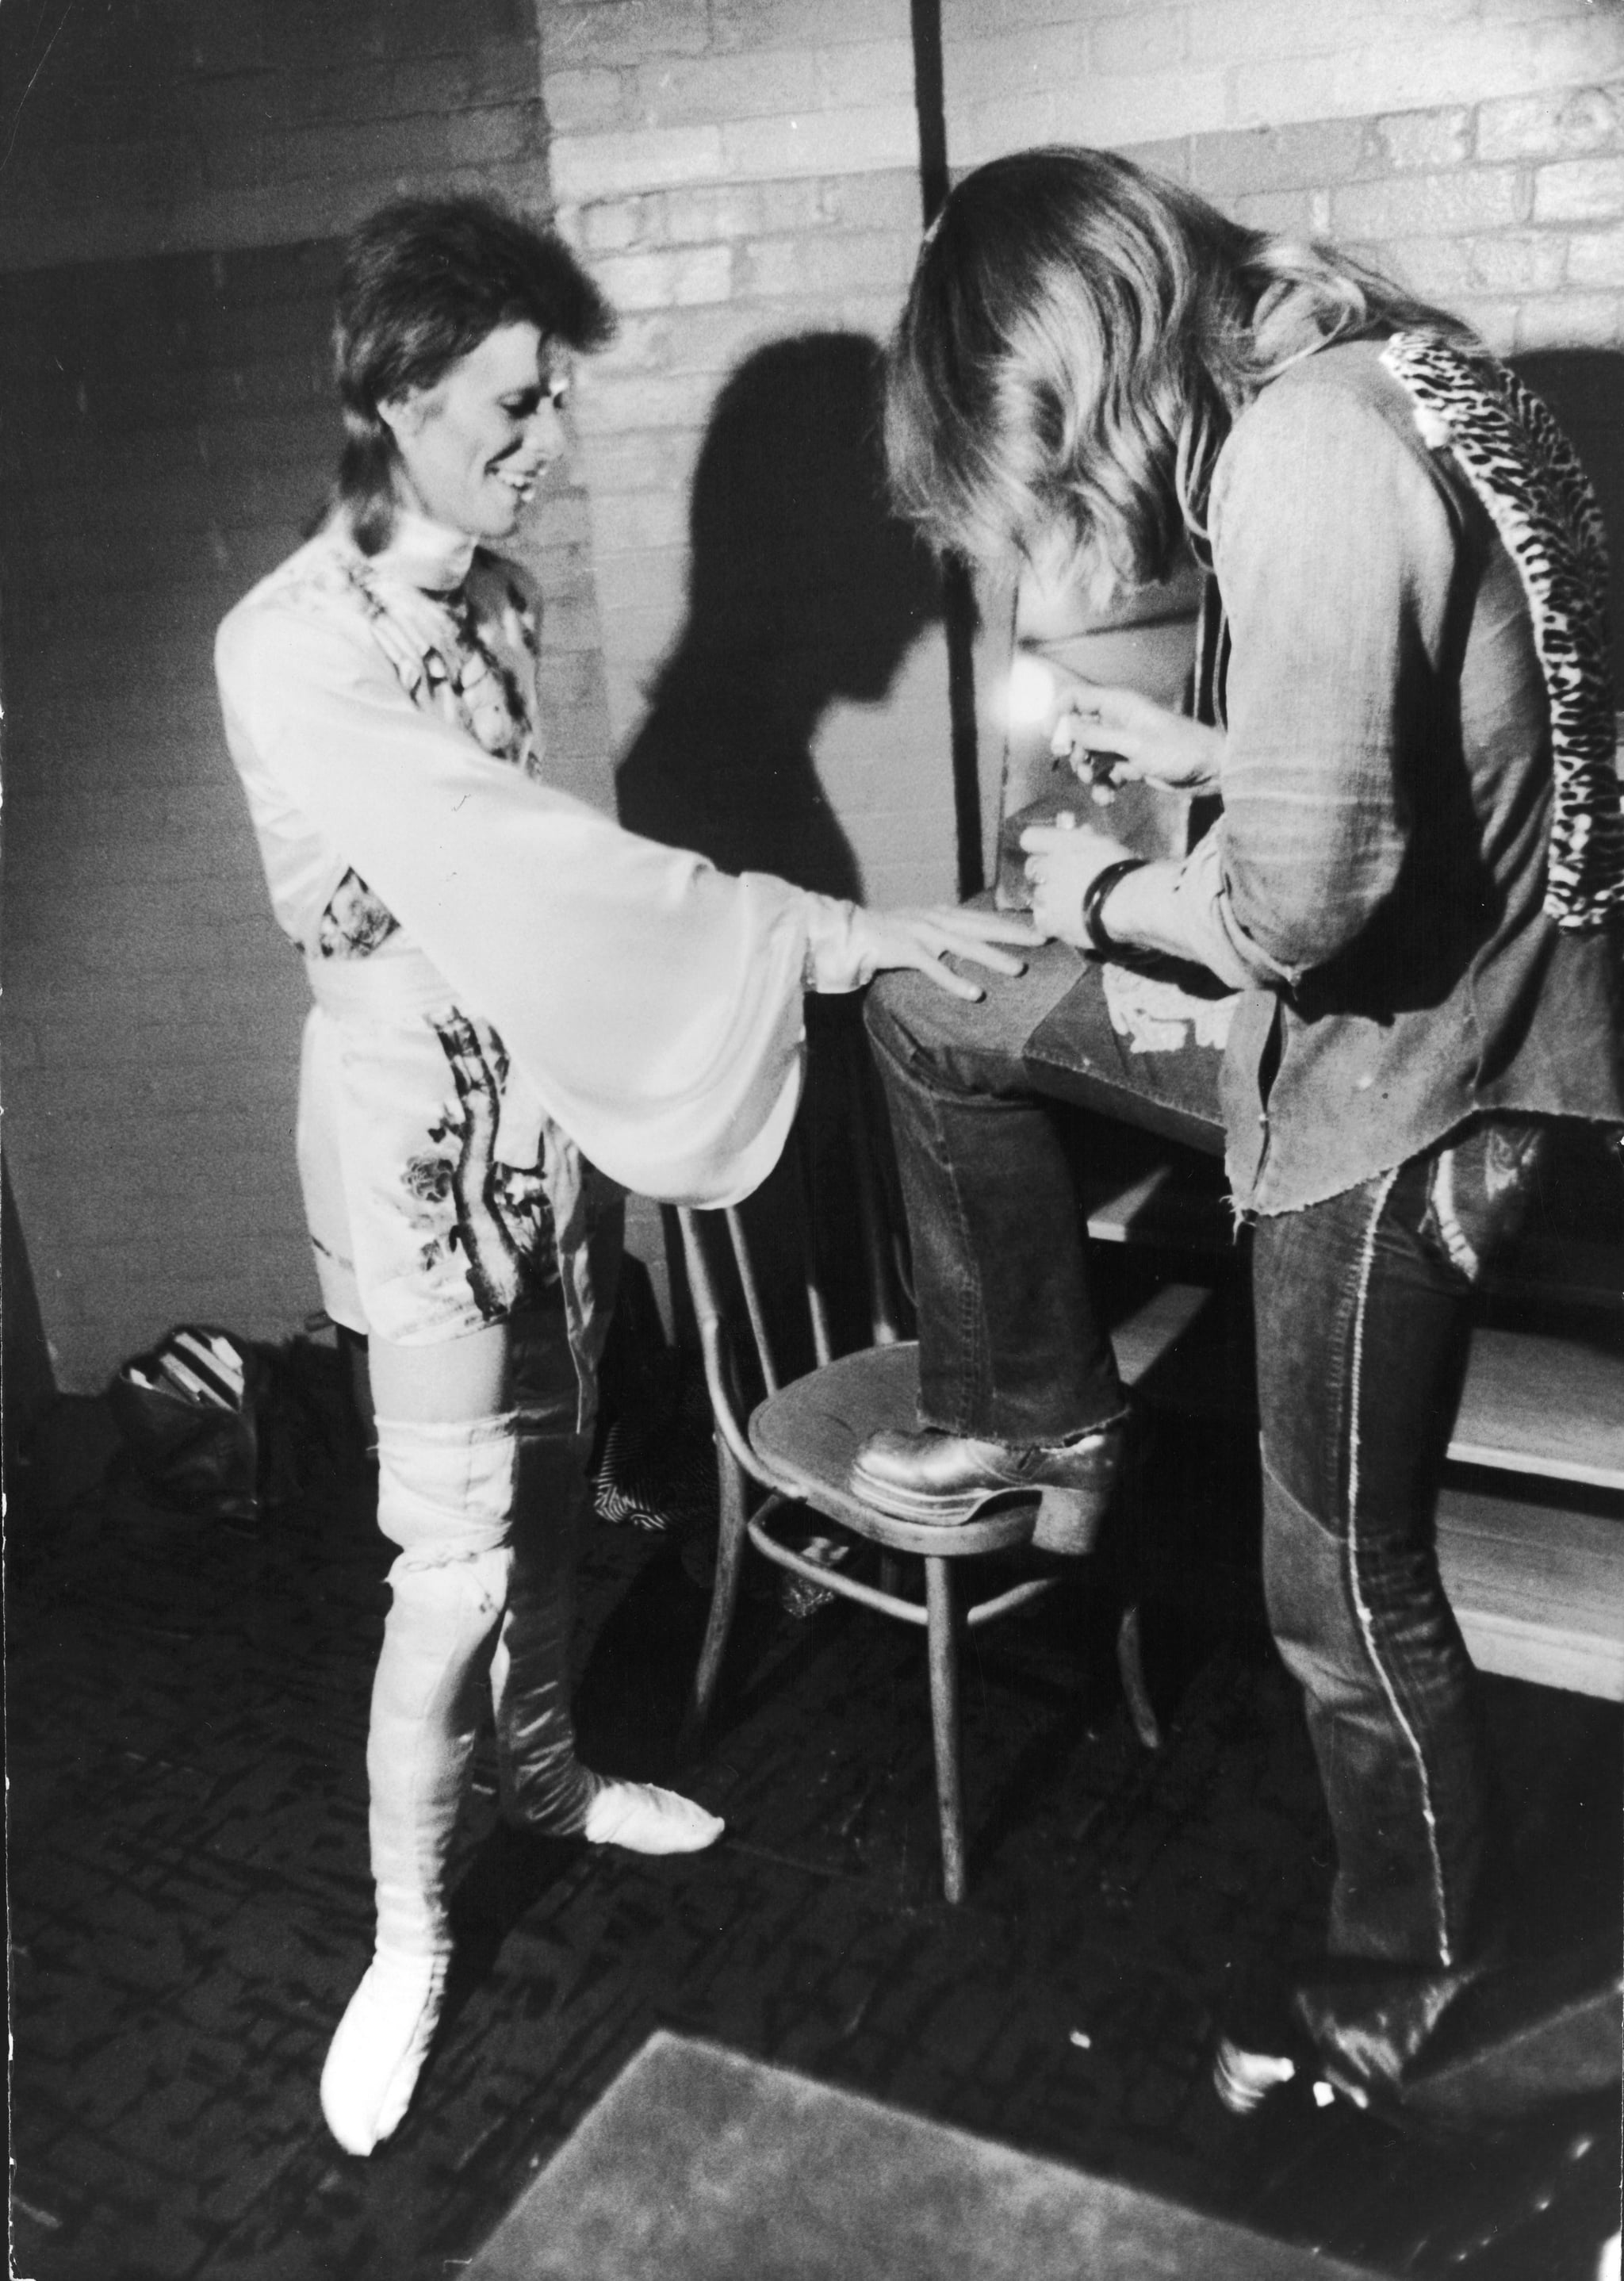 Make-up artist Pierre La Roche prepares English singer David Bowie for a performance as Aladdin Sane, 1973. Bowie is wearing a costume by Japanese designer Kansai Yamamoto. (Photo by Daily Express/Hulton Archive/Getty Images)